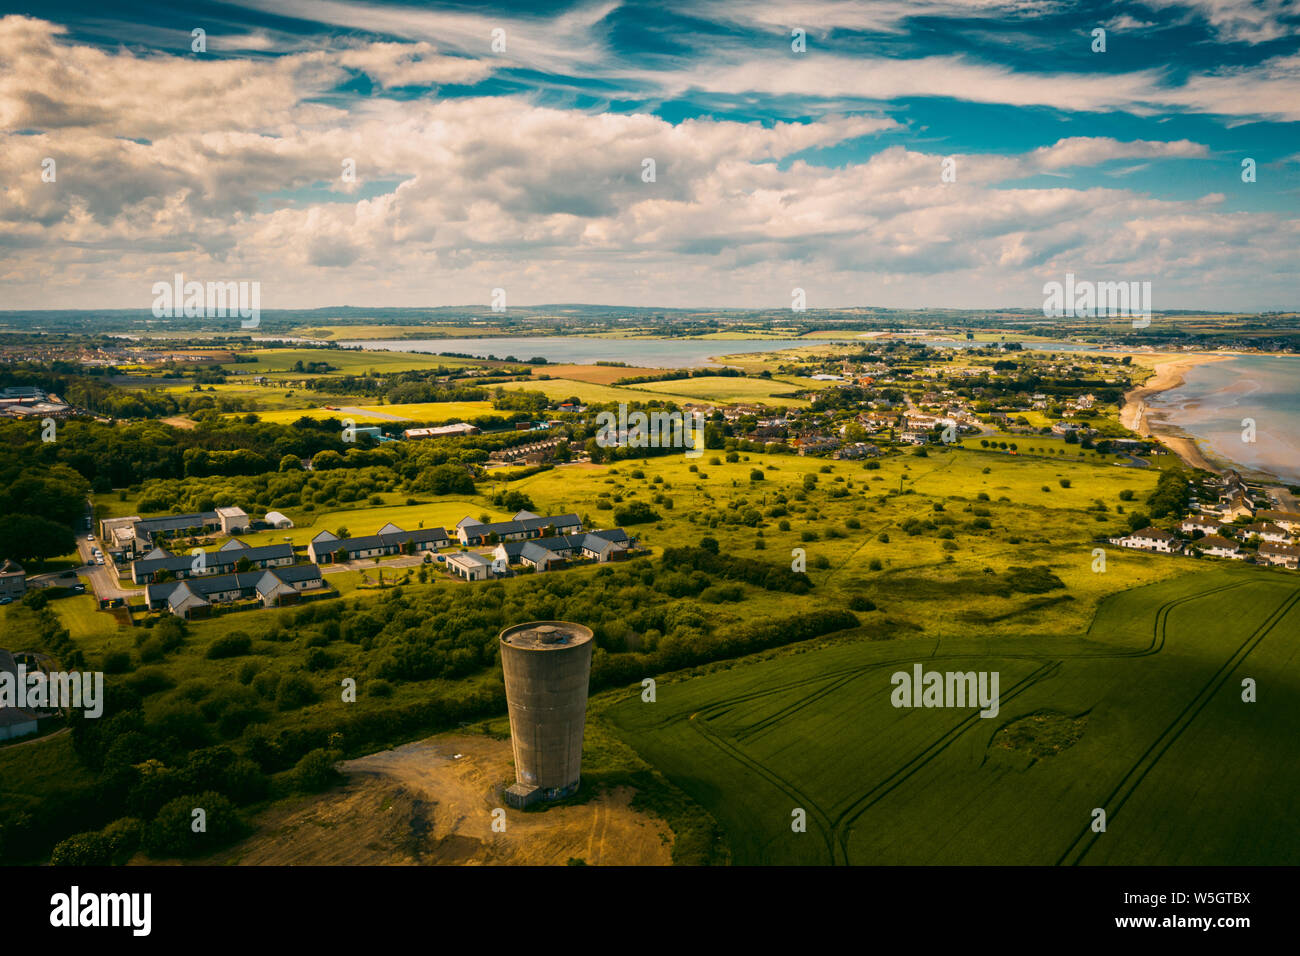 Landscape aerial view of Donabate region in Dublin, Ireland. Stock Photo